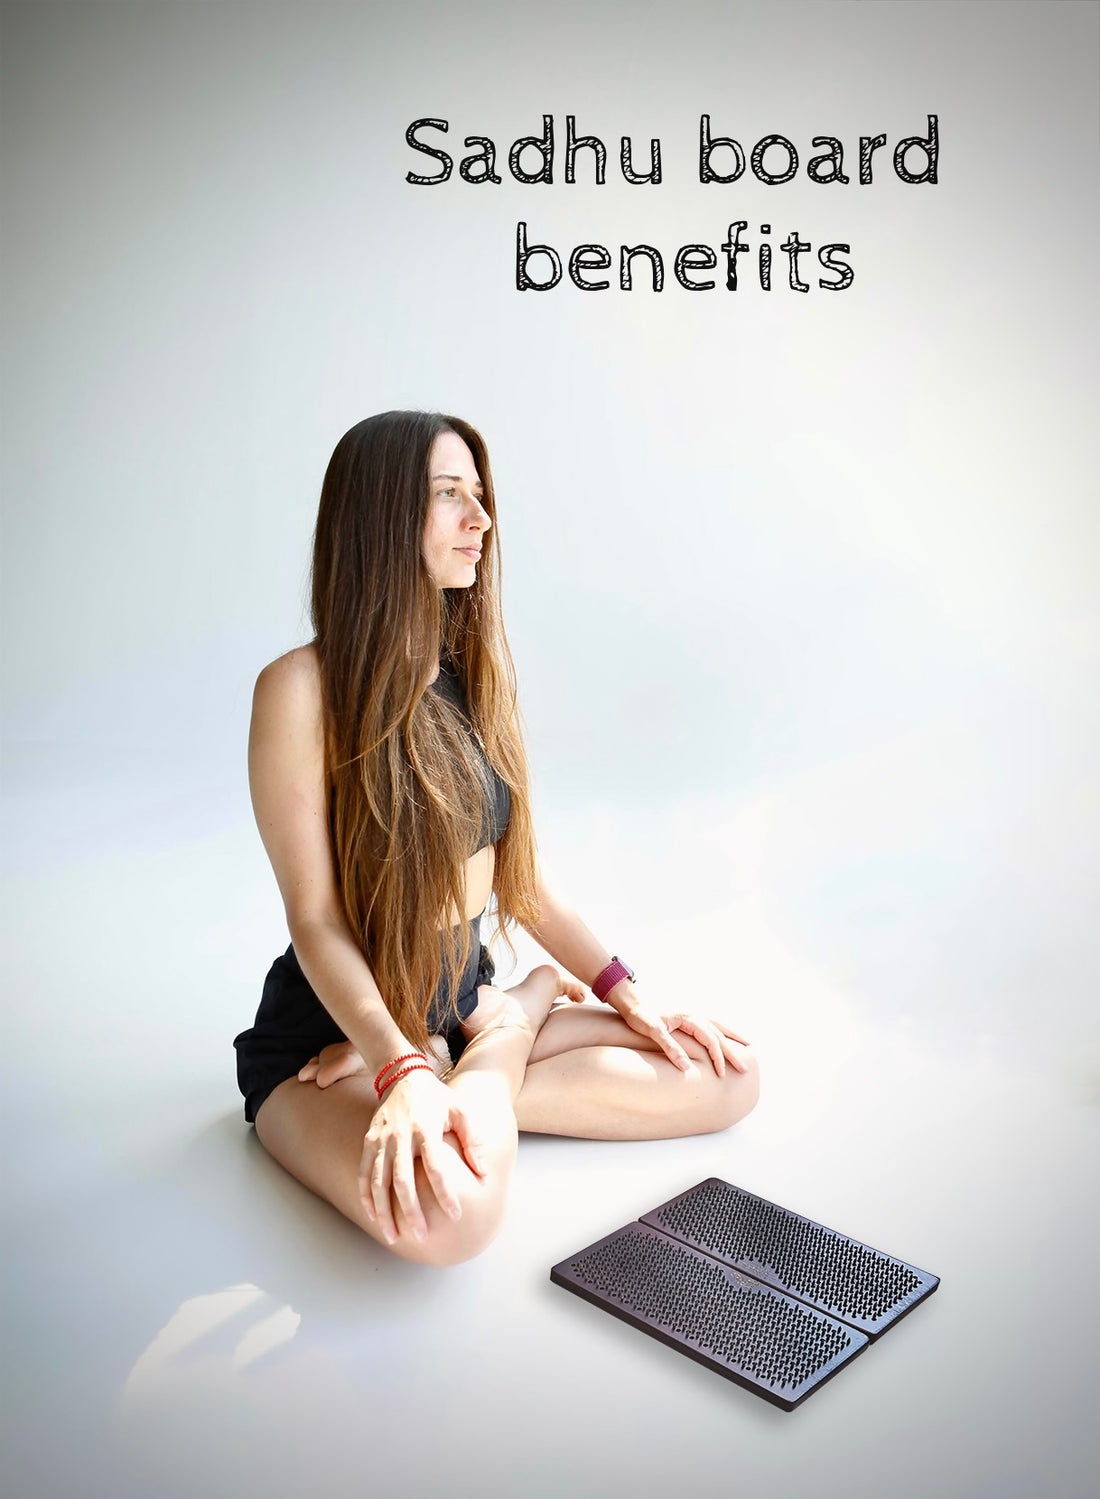 What are the benefits of sadhu board therapy?